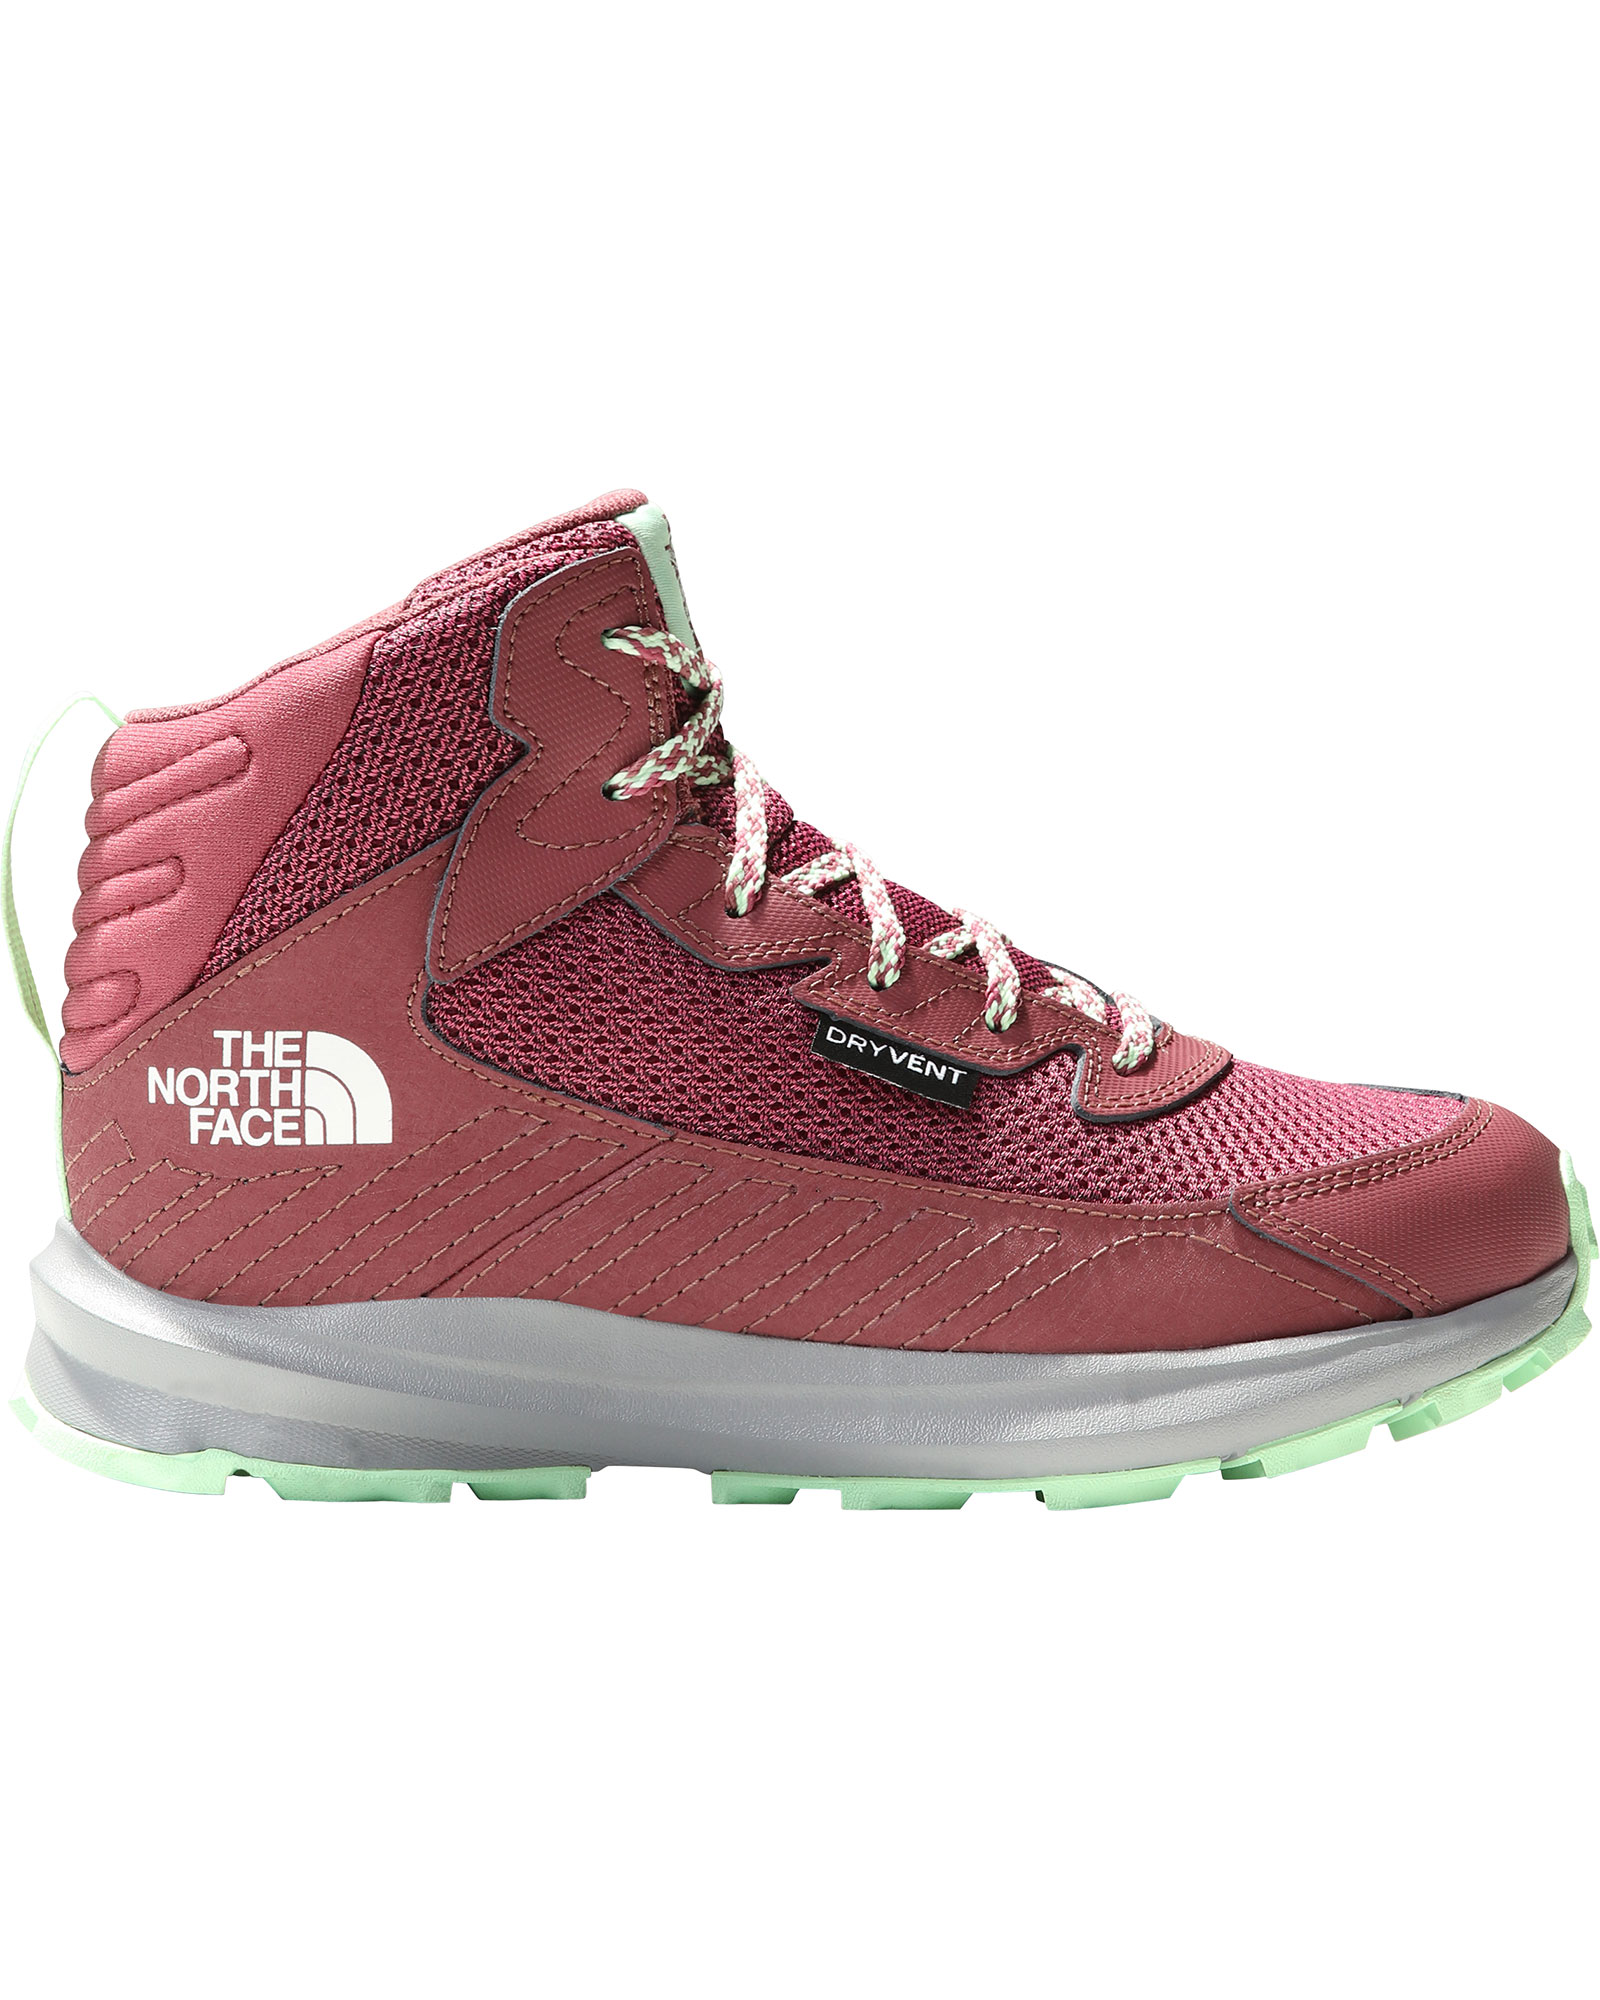 The North Face Youth Fastpack Hiker Mid Kids’ Waterproof Boots - Red Violet/Wild Ginger UK 5